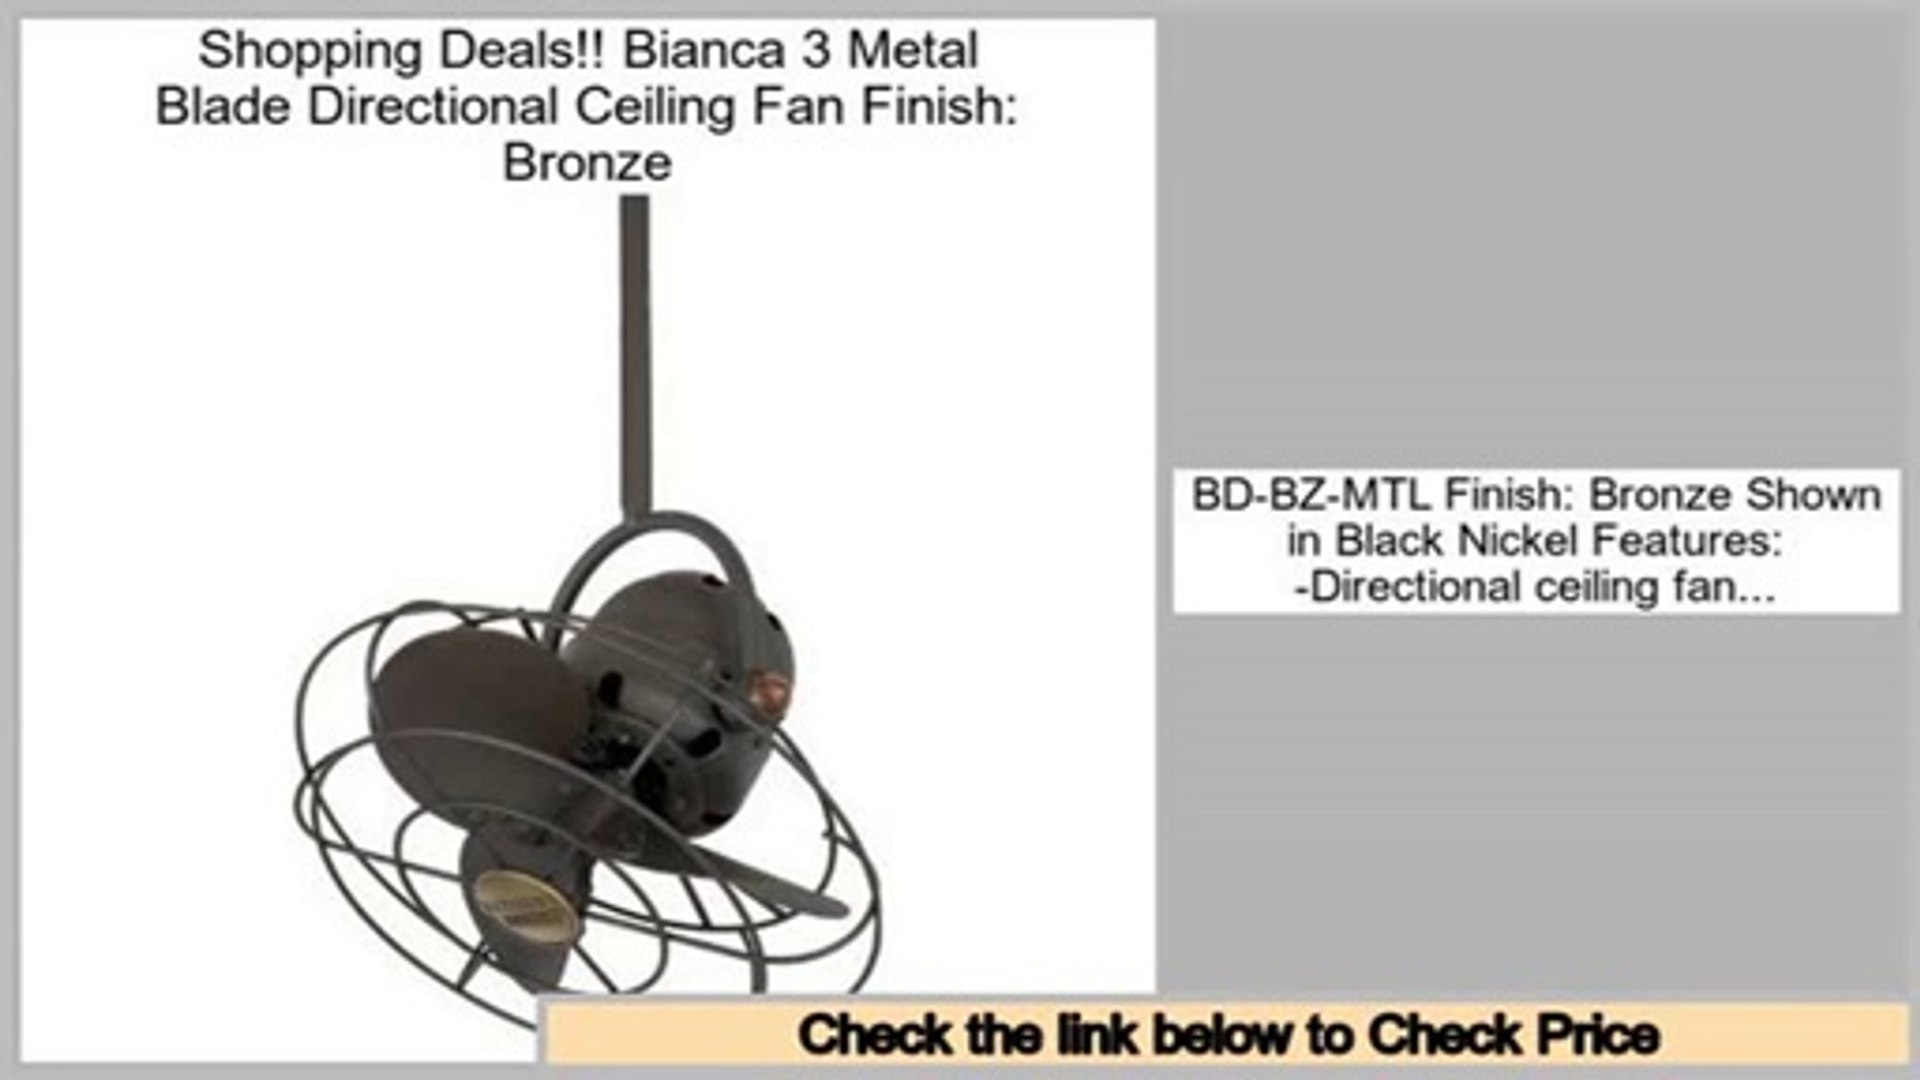 Low Prices Bianca 3 Metal Blade Directional Ceiling Fan Finish